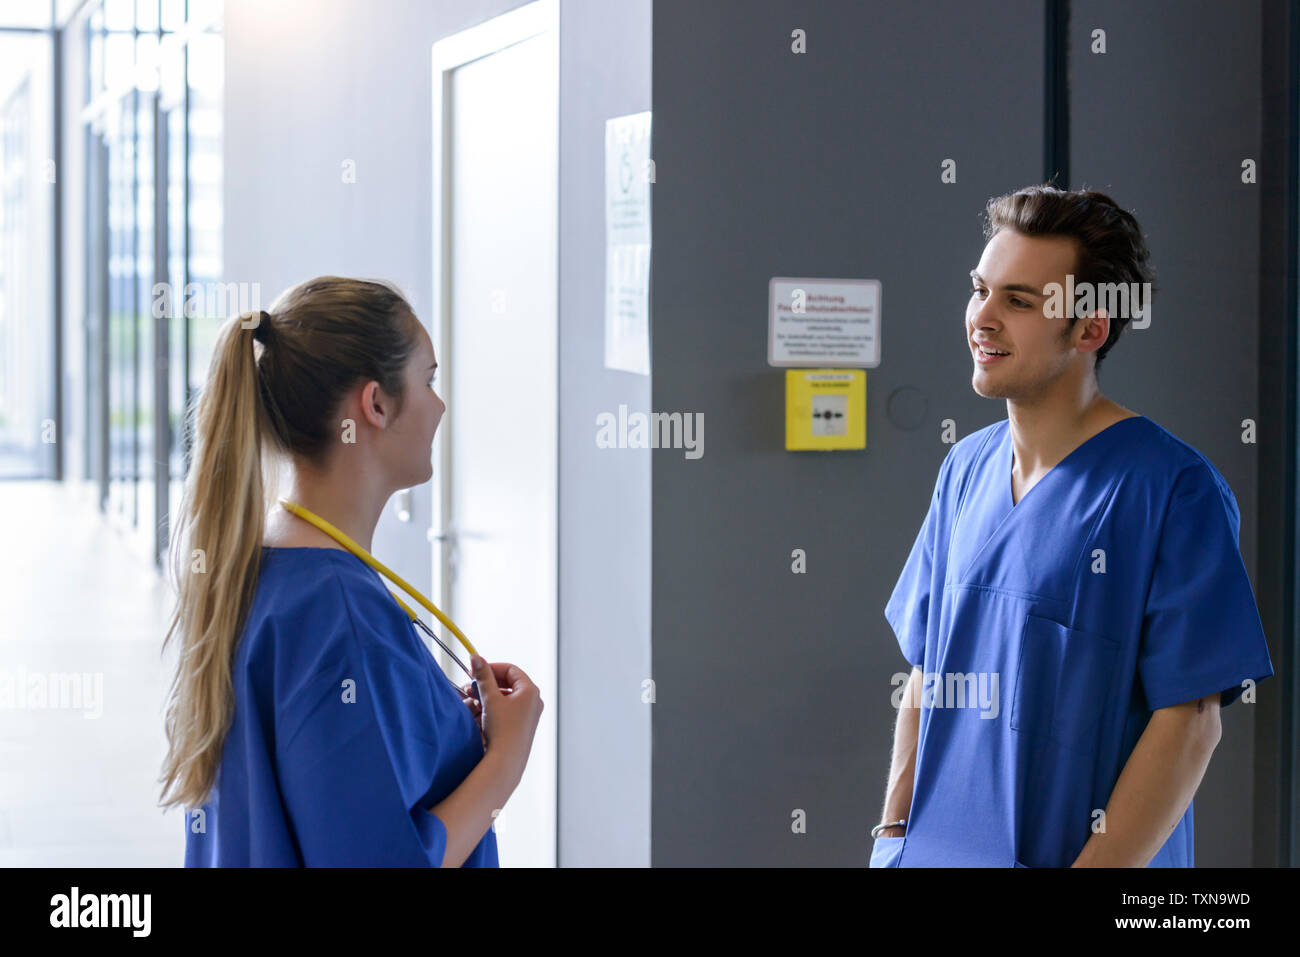 Male and female junior doctors chatting in hospital corridor Stock Photo